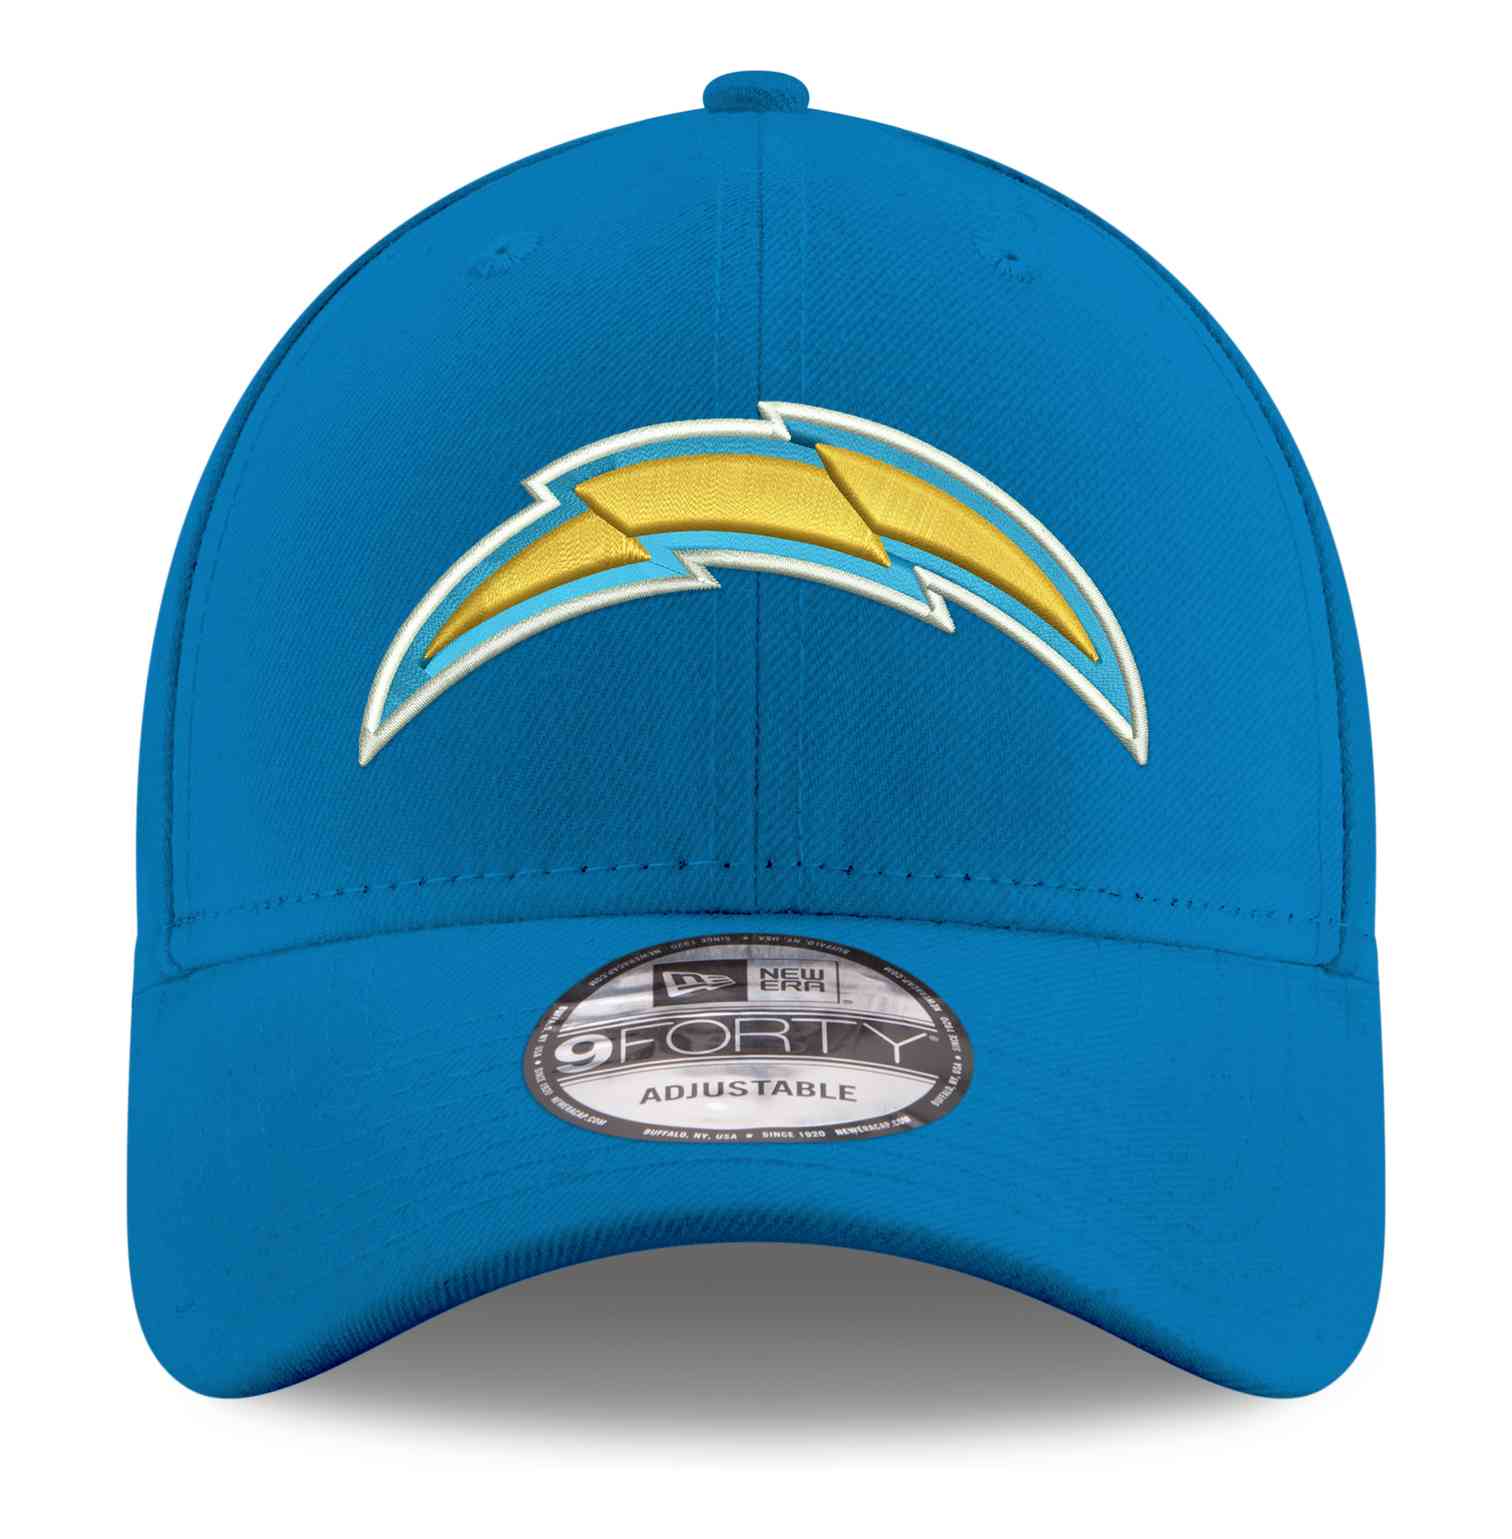 New Era - NFL Los Angeles Chargers The League 9Forty Strapback Cap